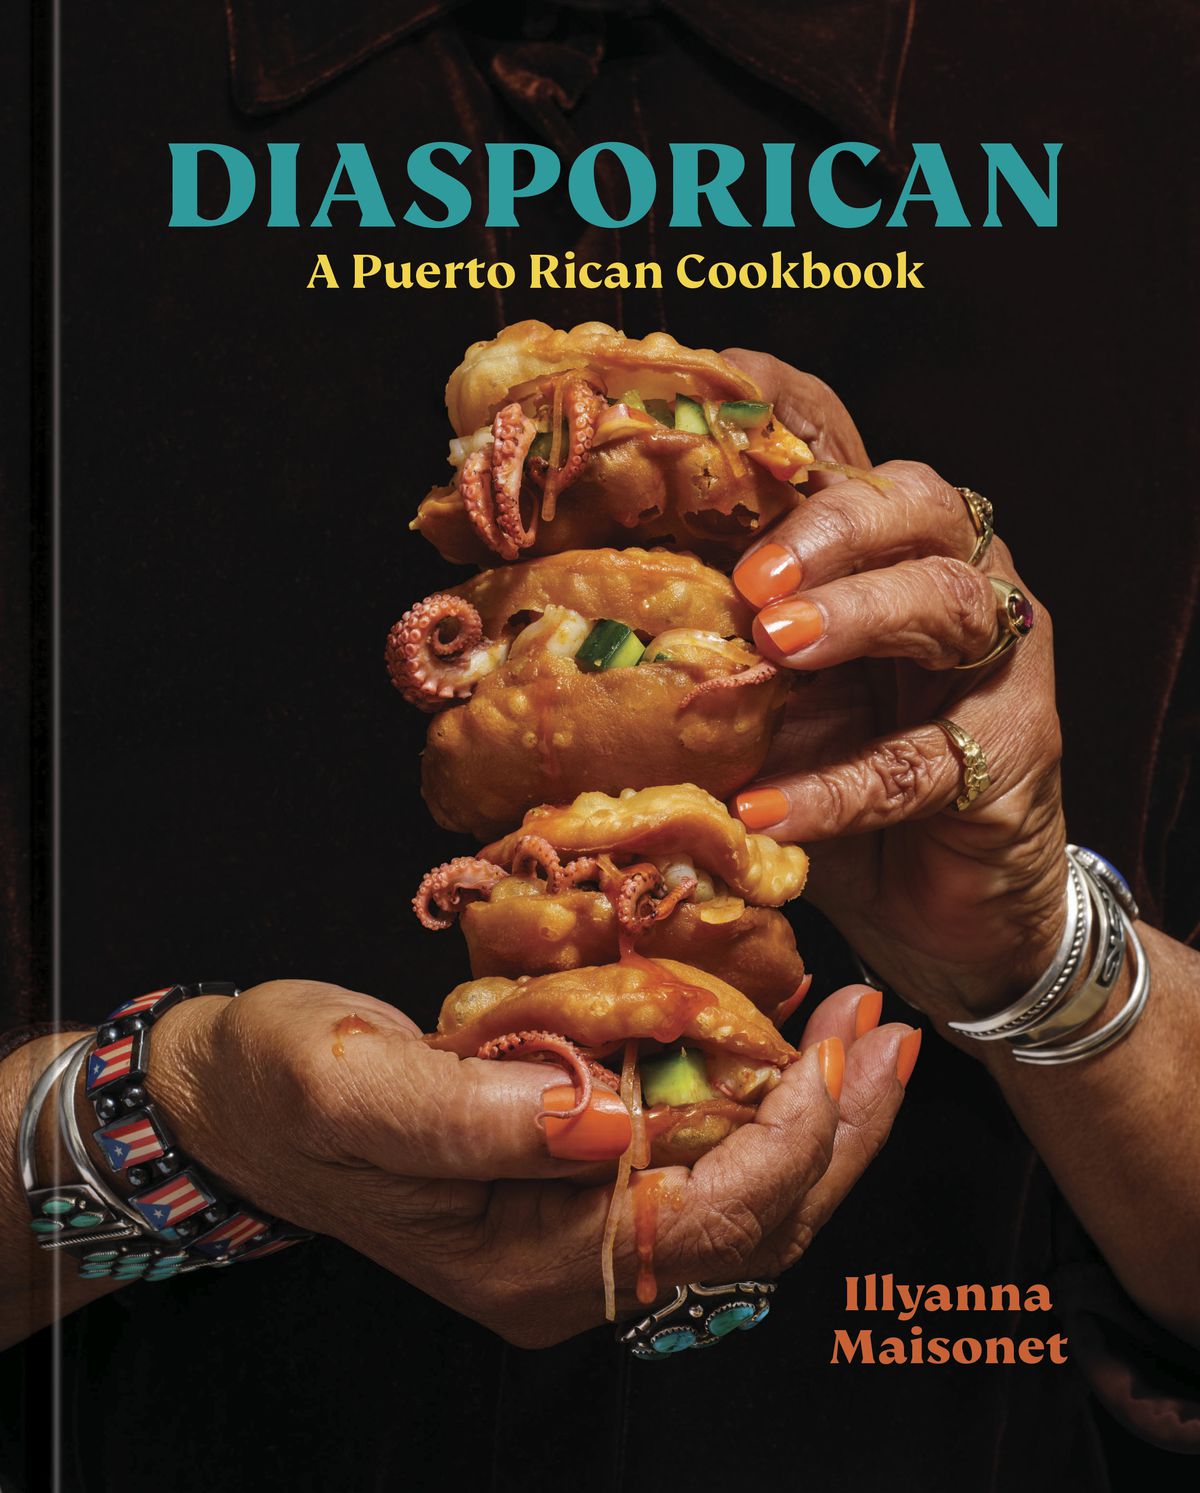 The cover of Diasporican featuring a woman’s hands holding a stack of food